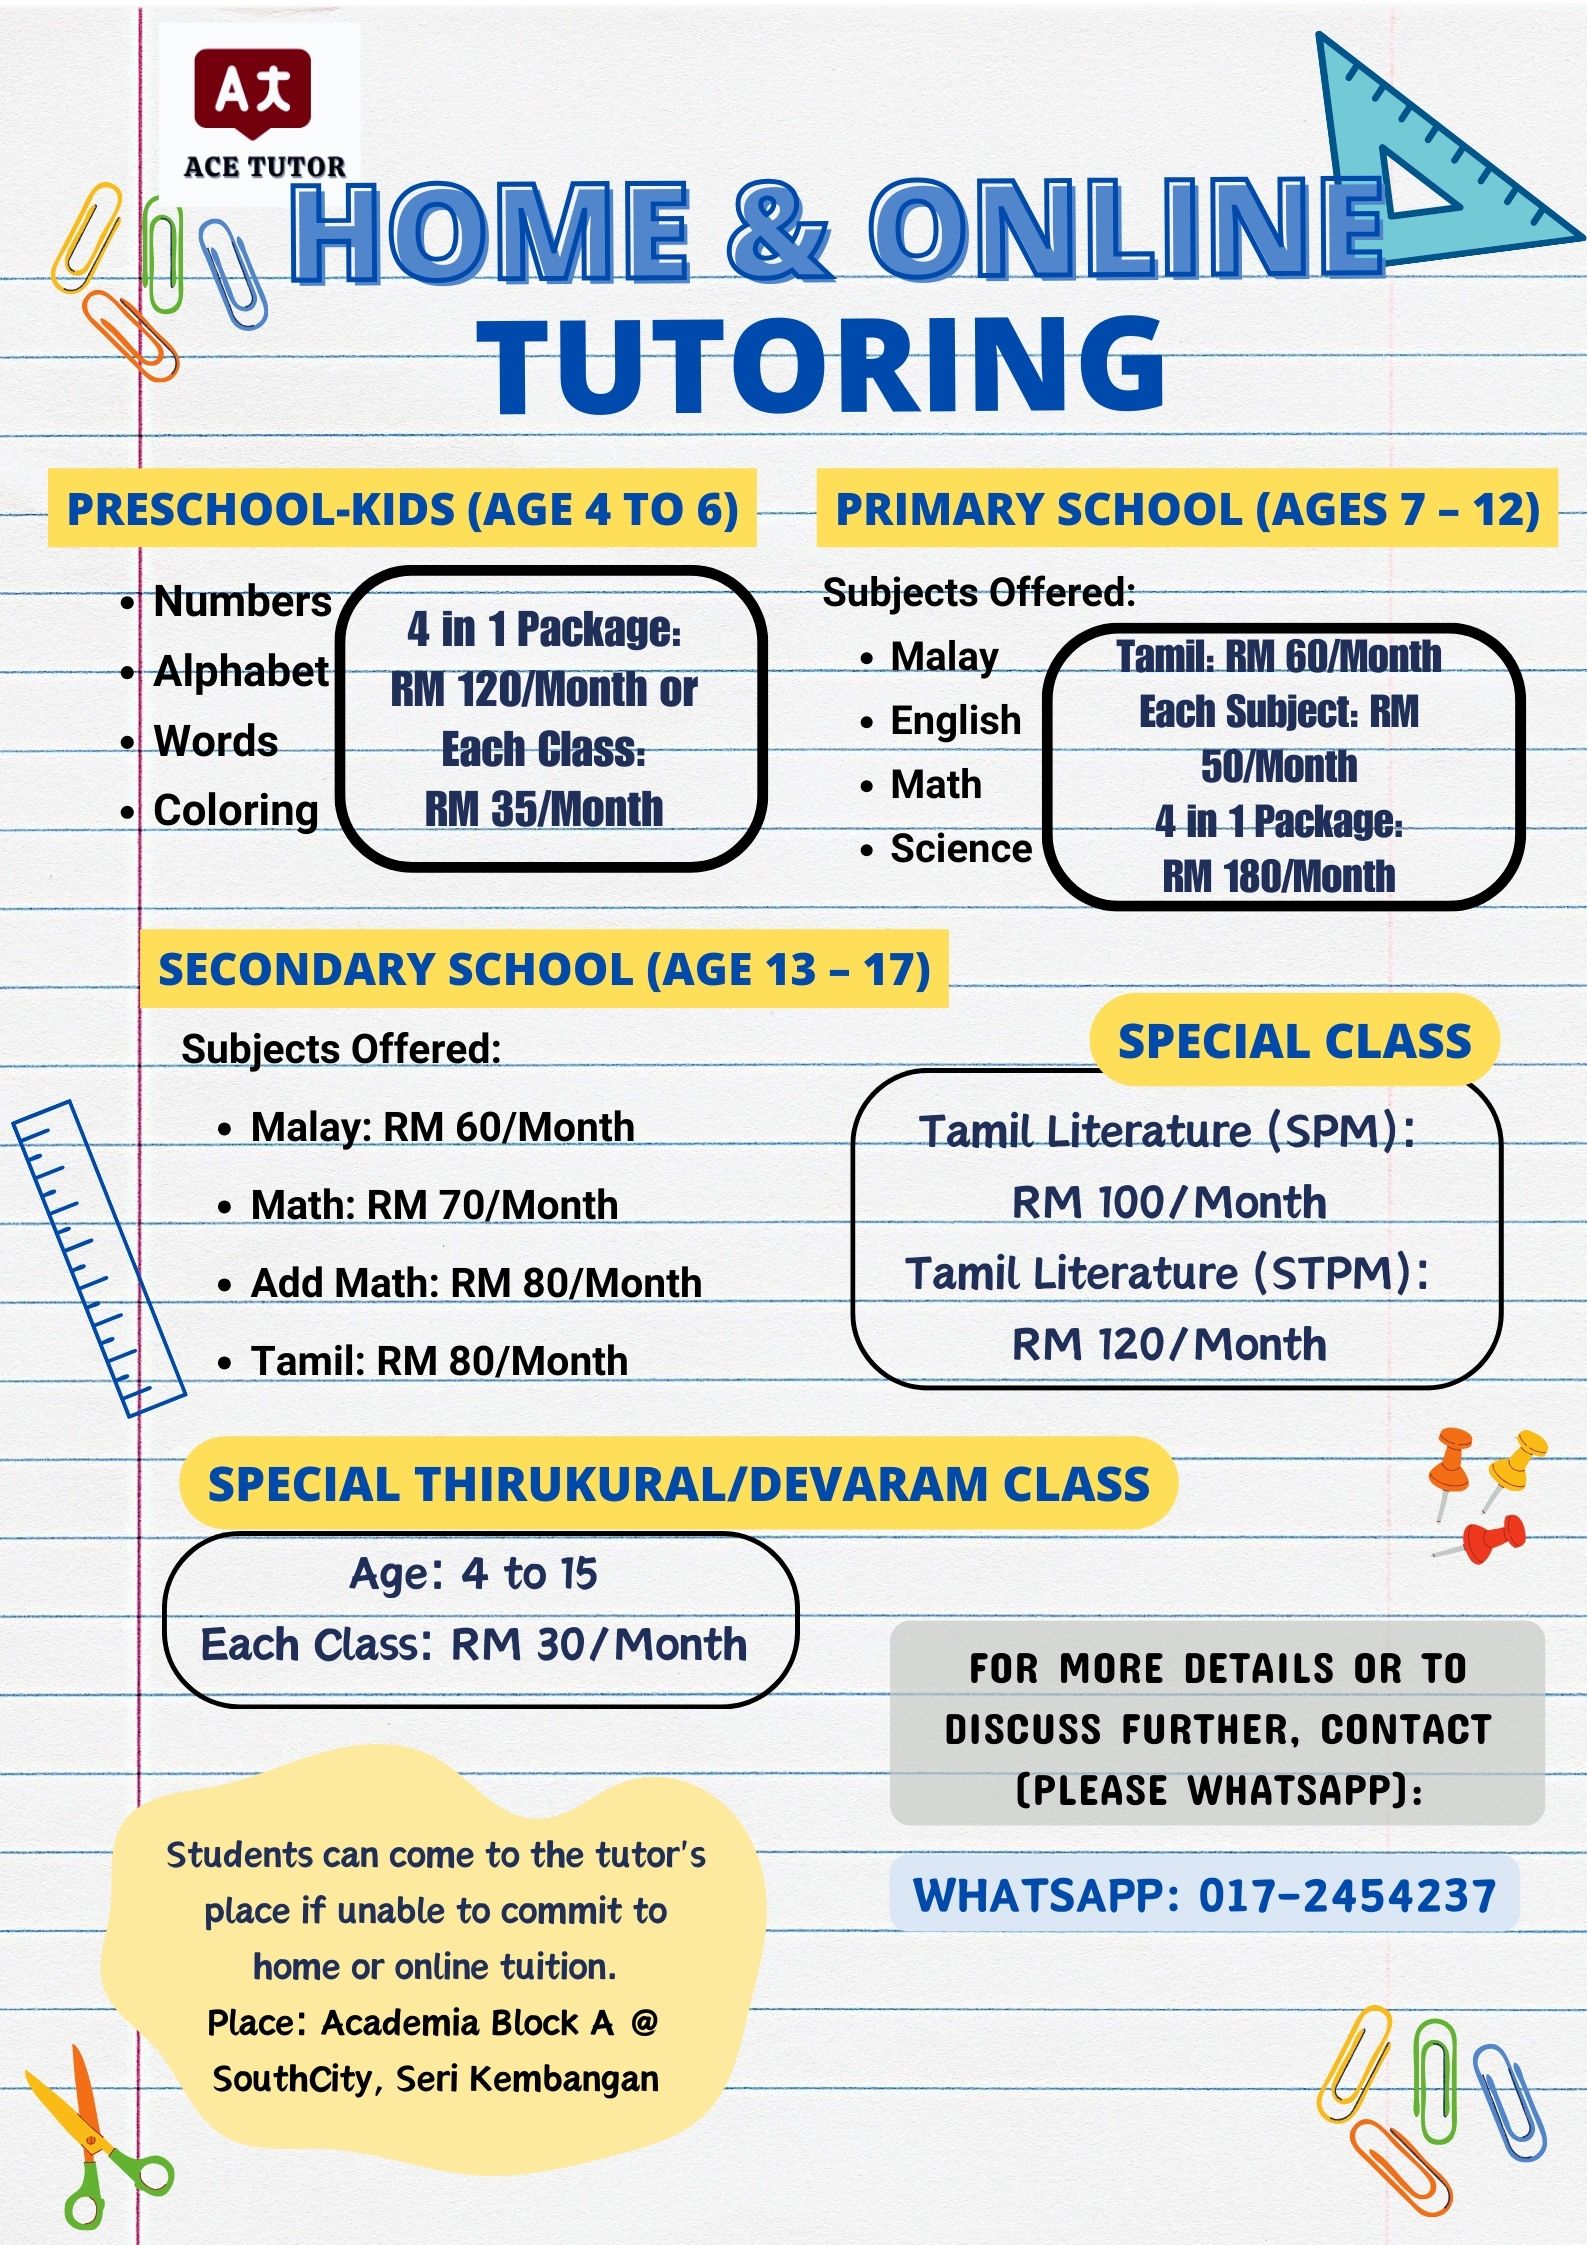 ACE TUTOR

HOME & ONLINE.
~~ TUTORING

PRESCHOOL-KIDS (AGE4 TO 6) - PRIMARY SCHOOL (AGES 7 - 12) -

 

—s Numbers; —N\ Subjects Offered: —

~ 4in1Package:
Alphabet] gy 120/Month or : es Eiri Til

o Words — gen : geet
ach Class: Sain 50/Month

«| Coloring RM 35/Month 4 in 1 Package:

RM 180/Month

    

  
 
 
   
  
  
   

« Science

| SECONDARY SCHOOL (AGE 13-17) Shea Si
Subjects Offered: ~~ SPECIAL CLASS

« Malay: RM 60/Month Tamil Literature (SPM):

« Math: RM 70/Month era] e a RM 100/Month
_« Add Math: RM 80/Month | Tamil Literature (STPM): |

 

e Tamil: RM 80/Month RM 120/Month

SPECIAL THIRUKURAL/DEVARAM CLASS 3 =

Age: 4 to 15
Each Class: RM 30/Month

   

FOR MORE DETAILS OR TO
DISCUSS FURTHER, CONTACT
(PLEASE WHATSAPP):

   

Students can come to the tutor's Sm - — a
place if unable to commit to = WHATSAPP: 017-2454237 :

home or online tuition.
Place: Academia Block A @

_ SouthCity, Seri Kembangan SE re RoR dU

\
4